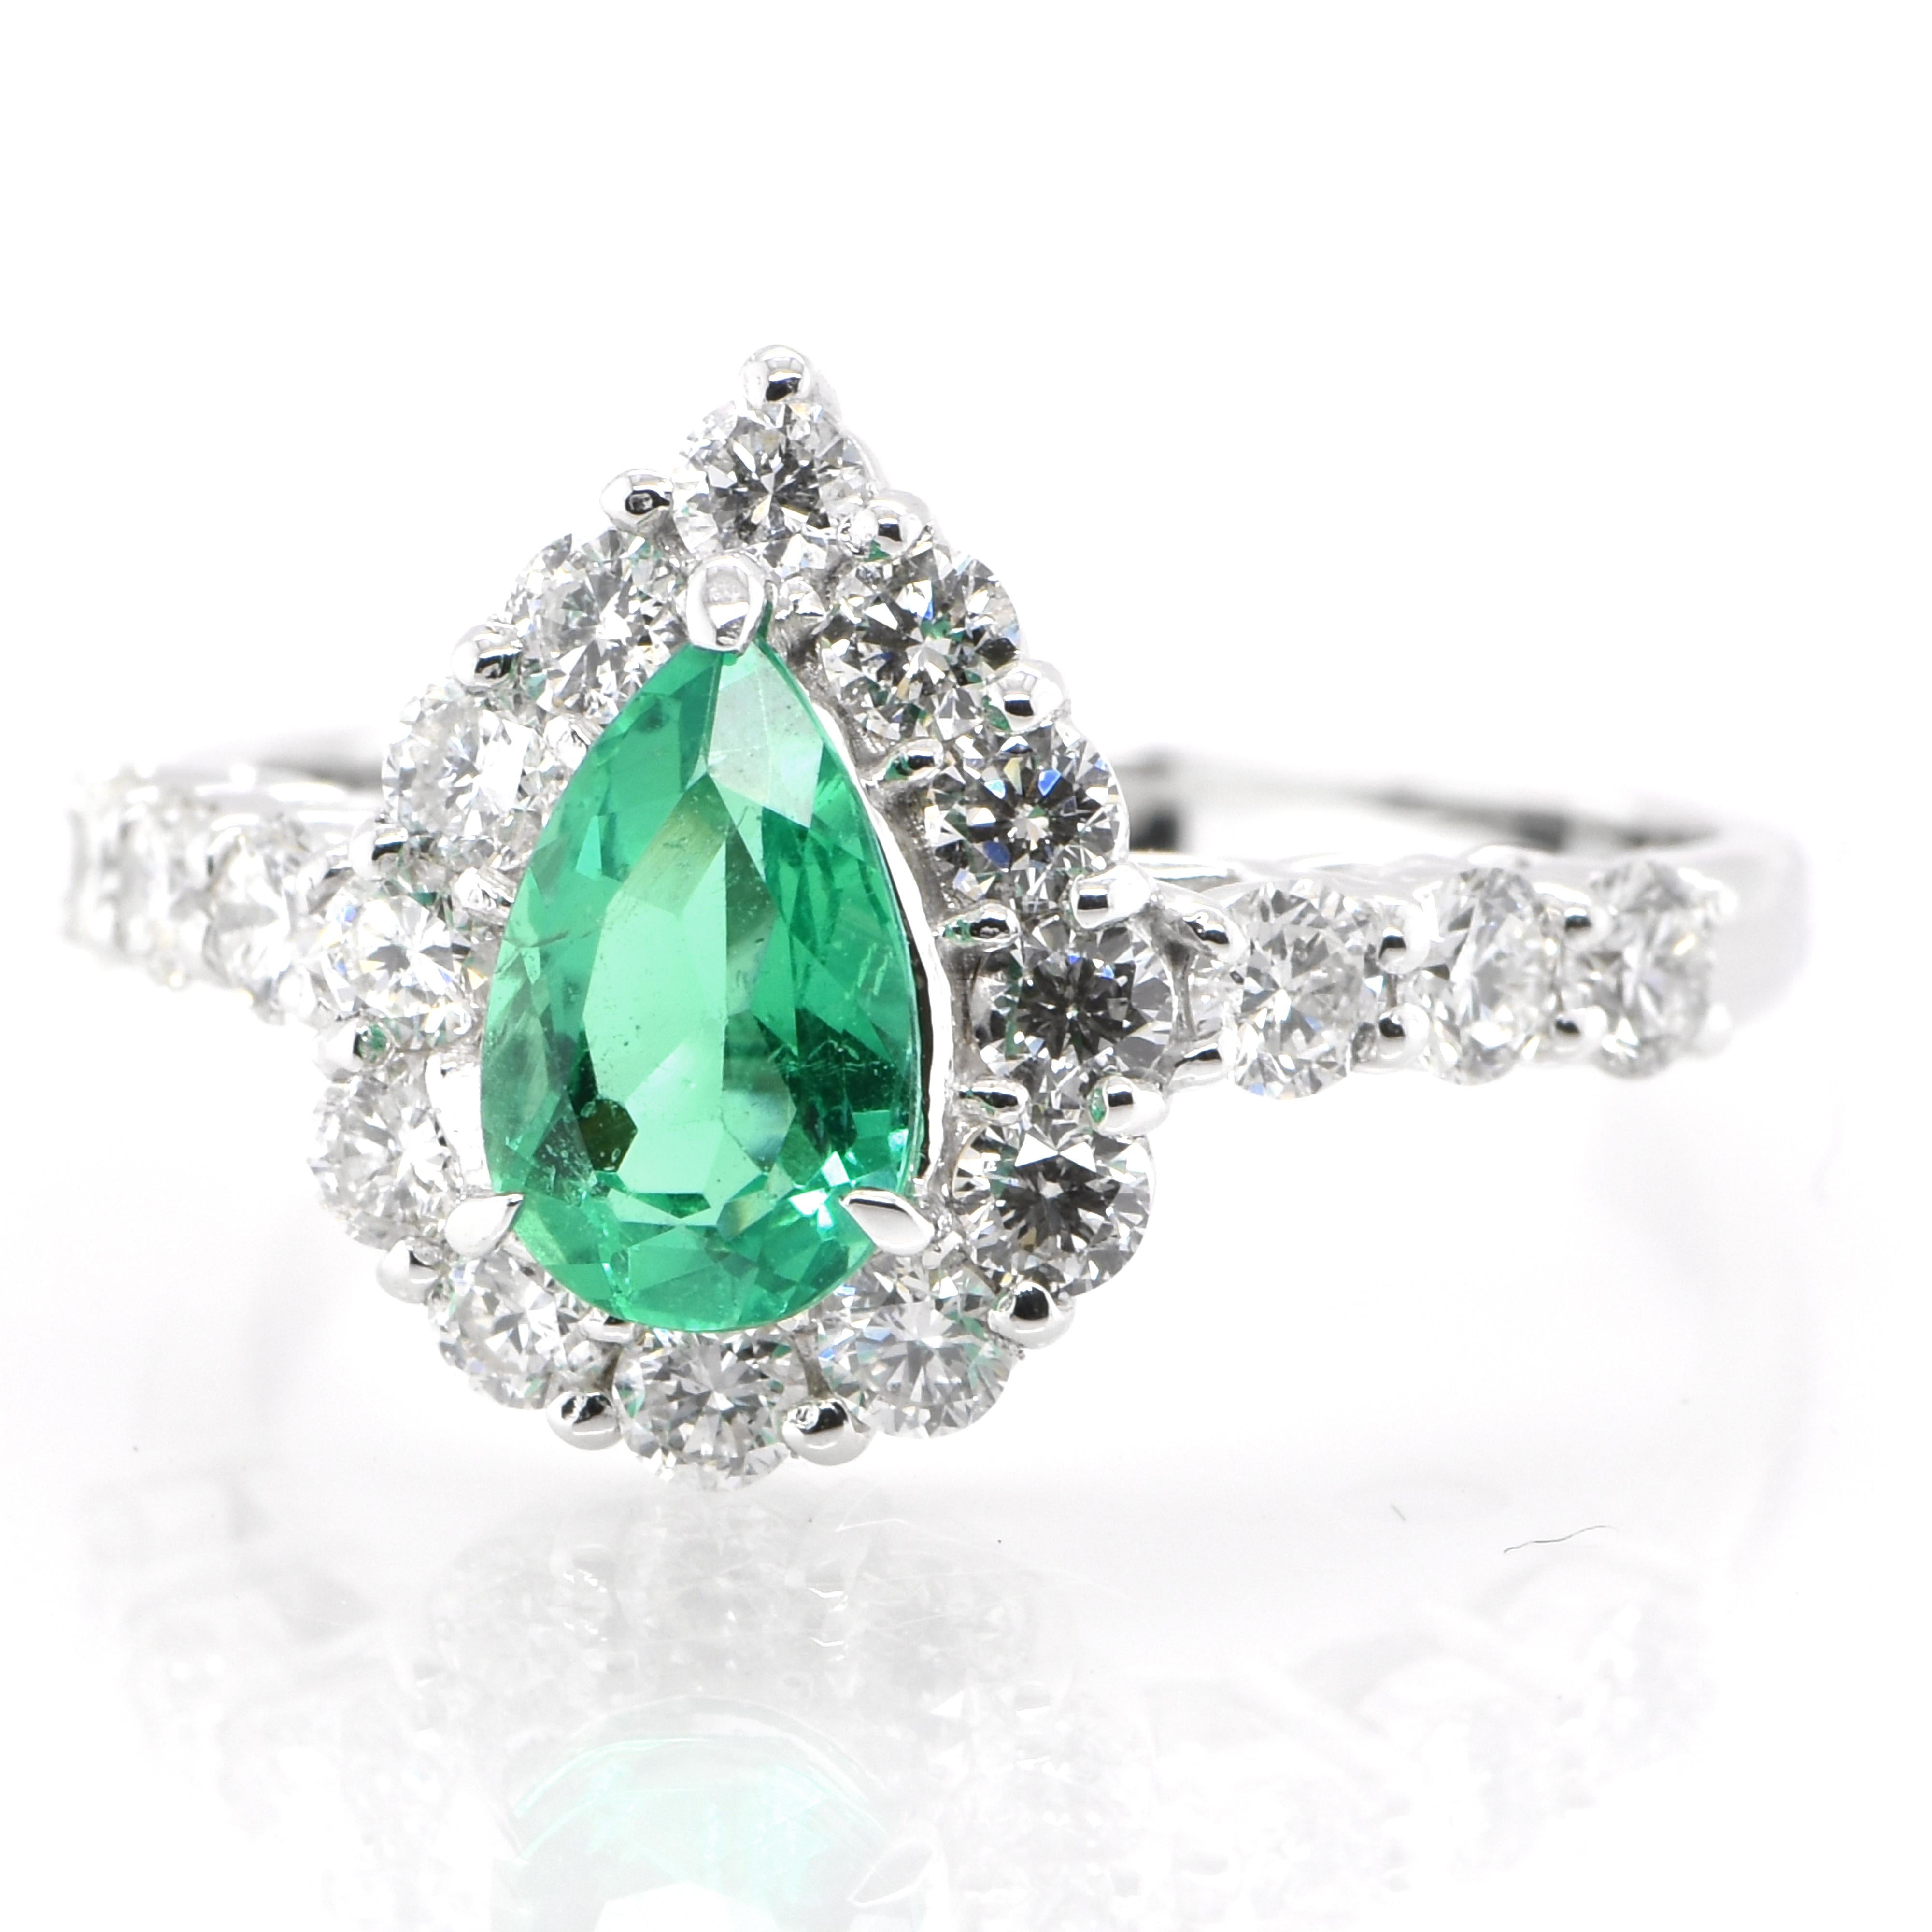 A stunning halo engagement ring featuring a 0.75 Carat Natural Pear-Cut Emerald and 0.78 Carats of Diamond Accents set in Platinum. People have admired emerald’s green for thousands of years. Emeralds have always been associated with the lushest